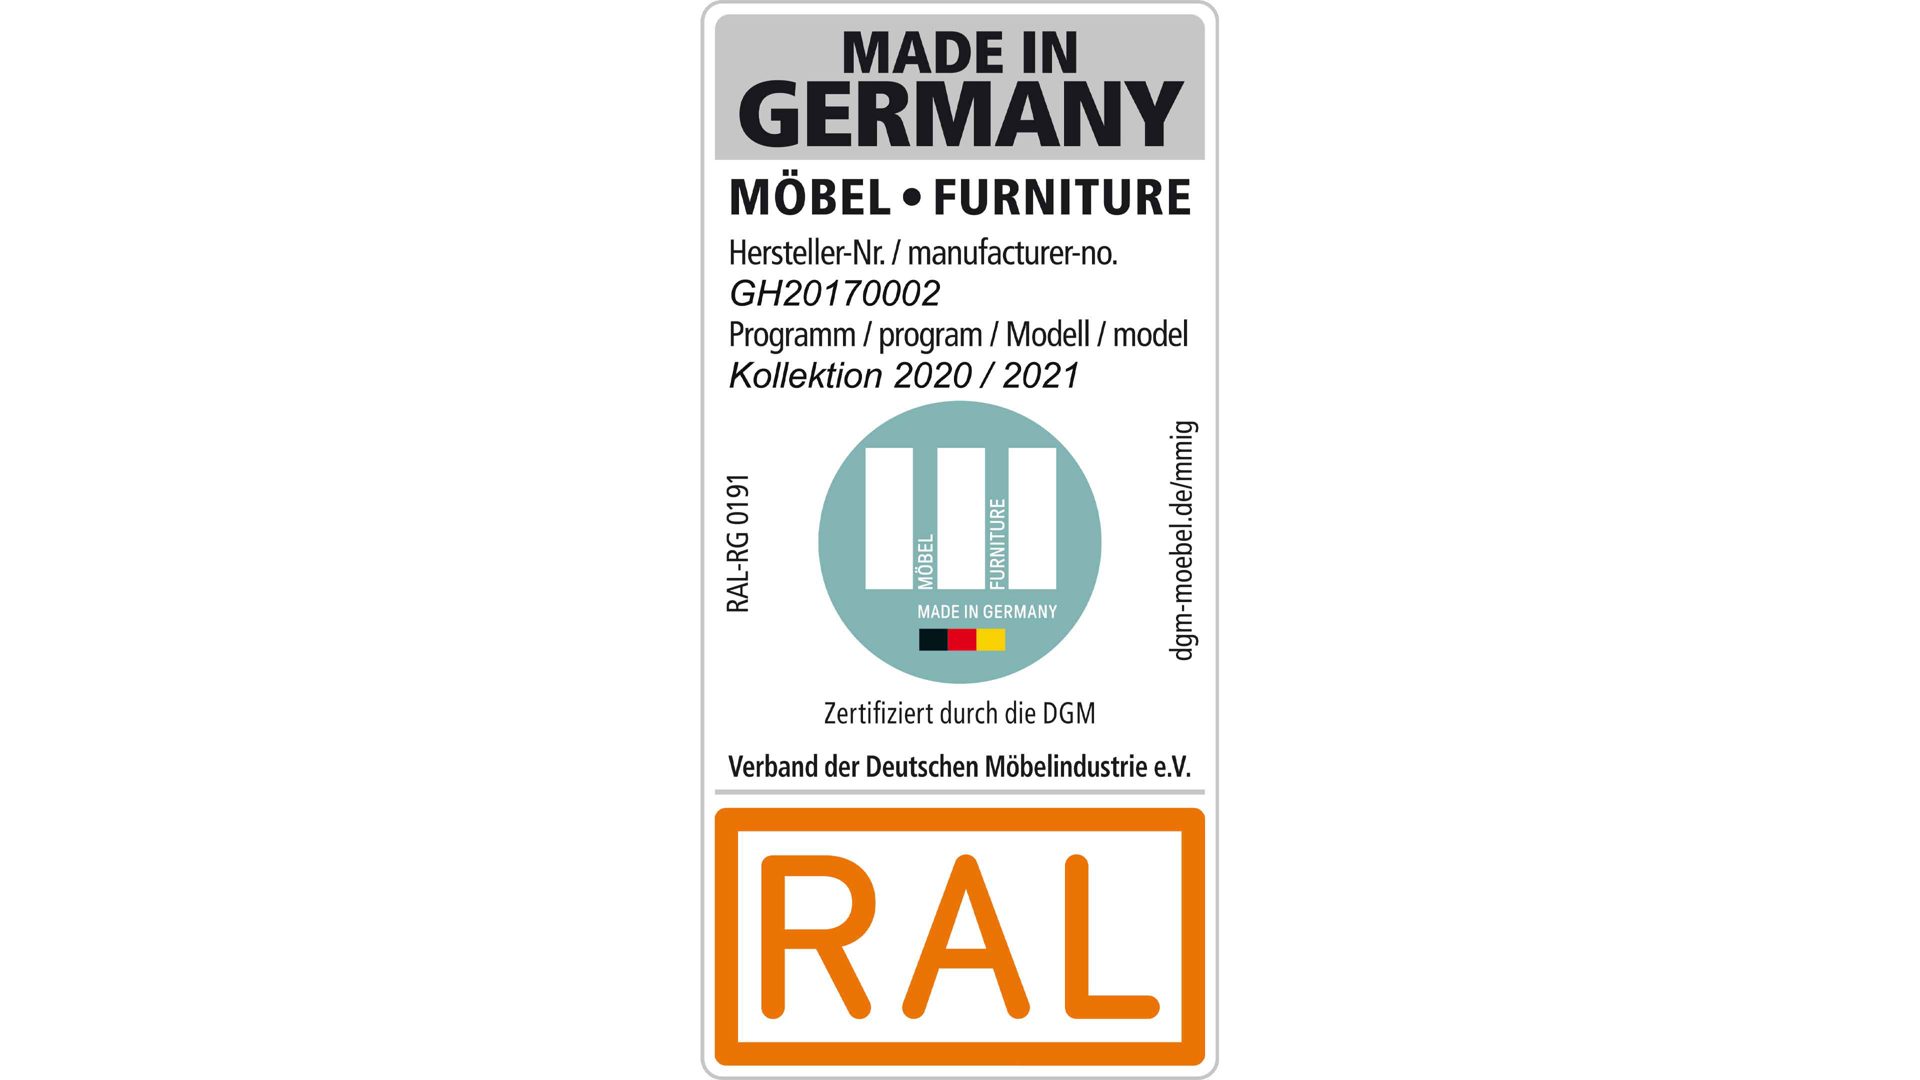 Hapo | RAL Made in Germany